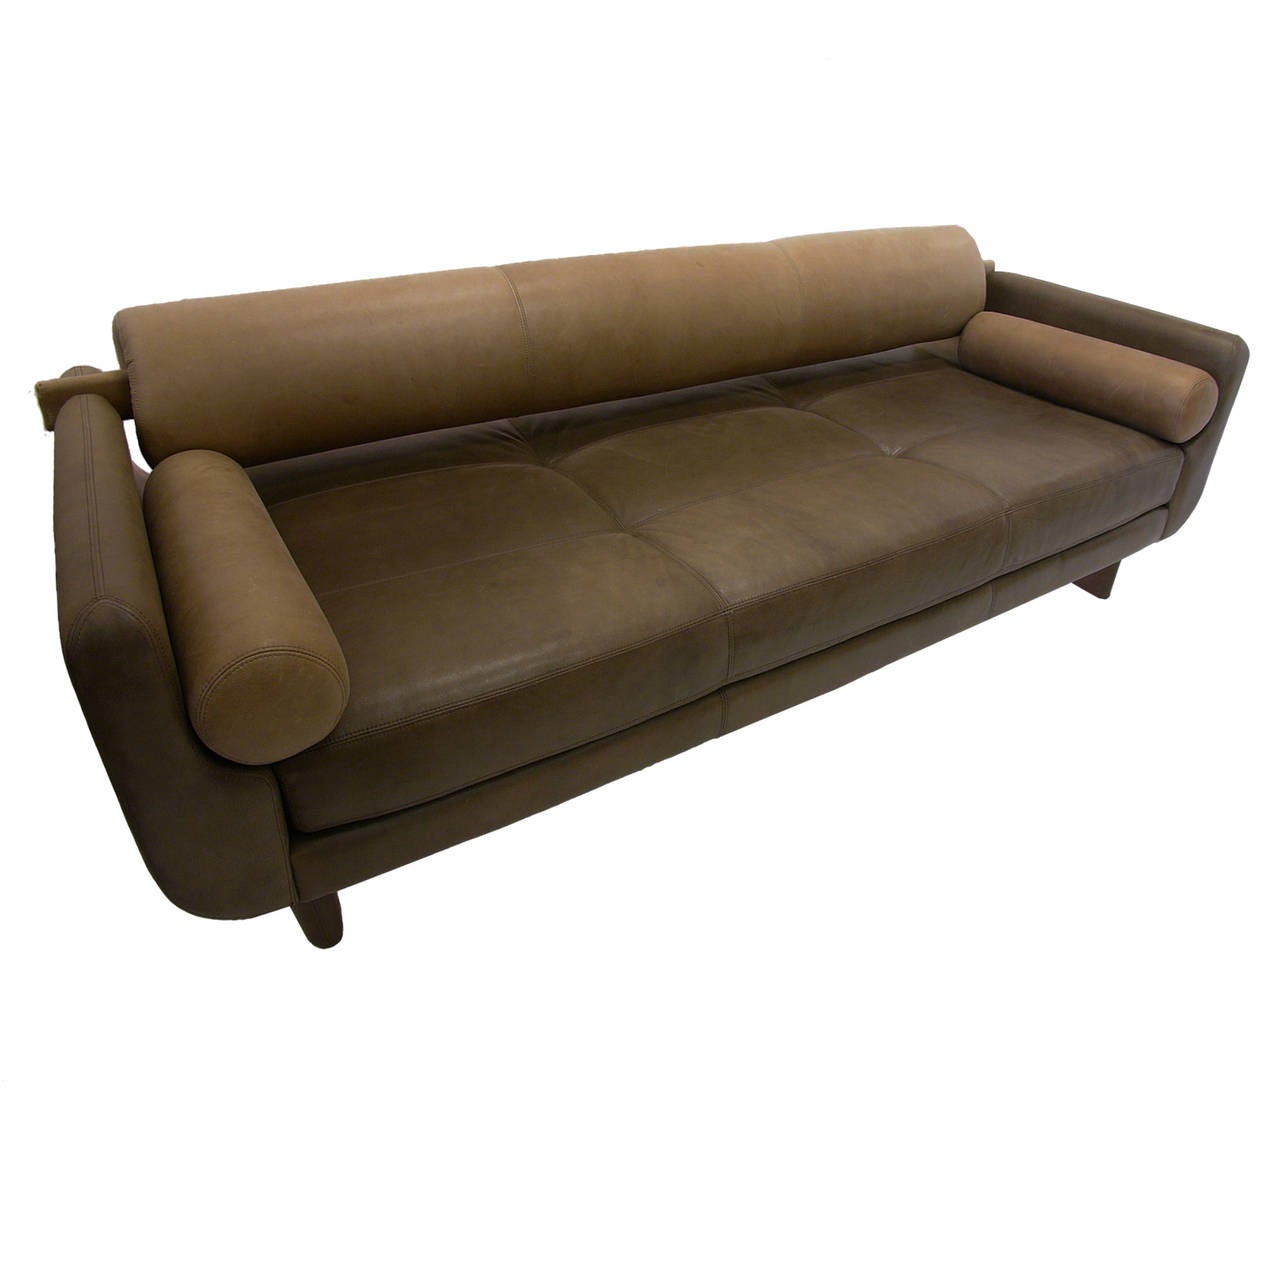 A Vladimir Kagan Matinee sofa made by American Leather. A discontinued design that is reminiscent of an earlier Kagan sofa. The back cushion is removable to convert it into a daybed.